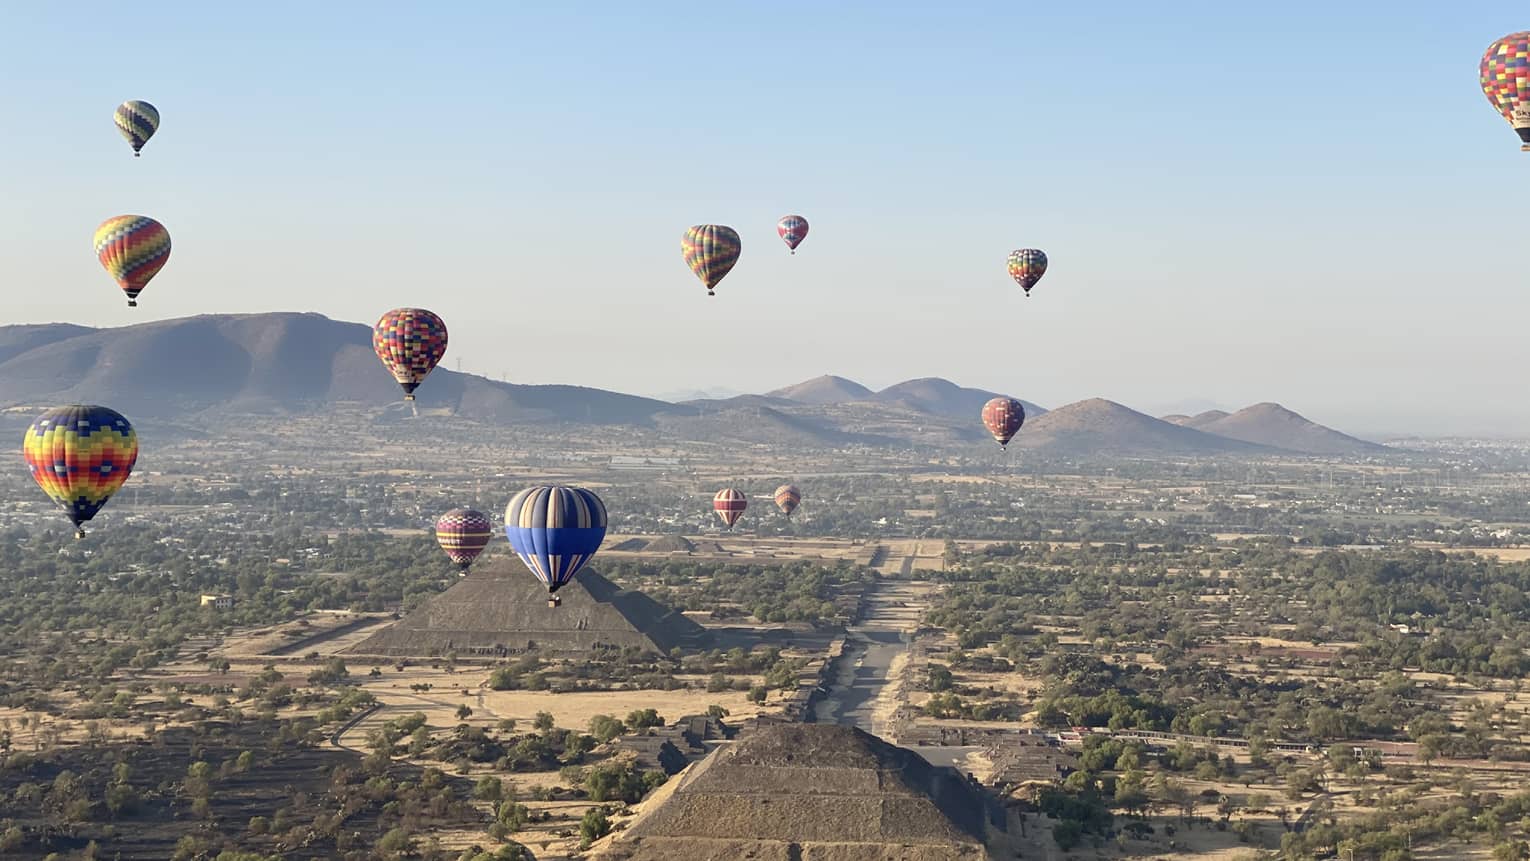 Hot-air balloons floating over old temples in a dessert covered in shrubs.